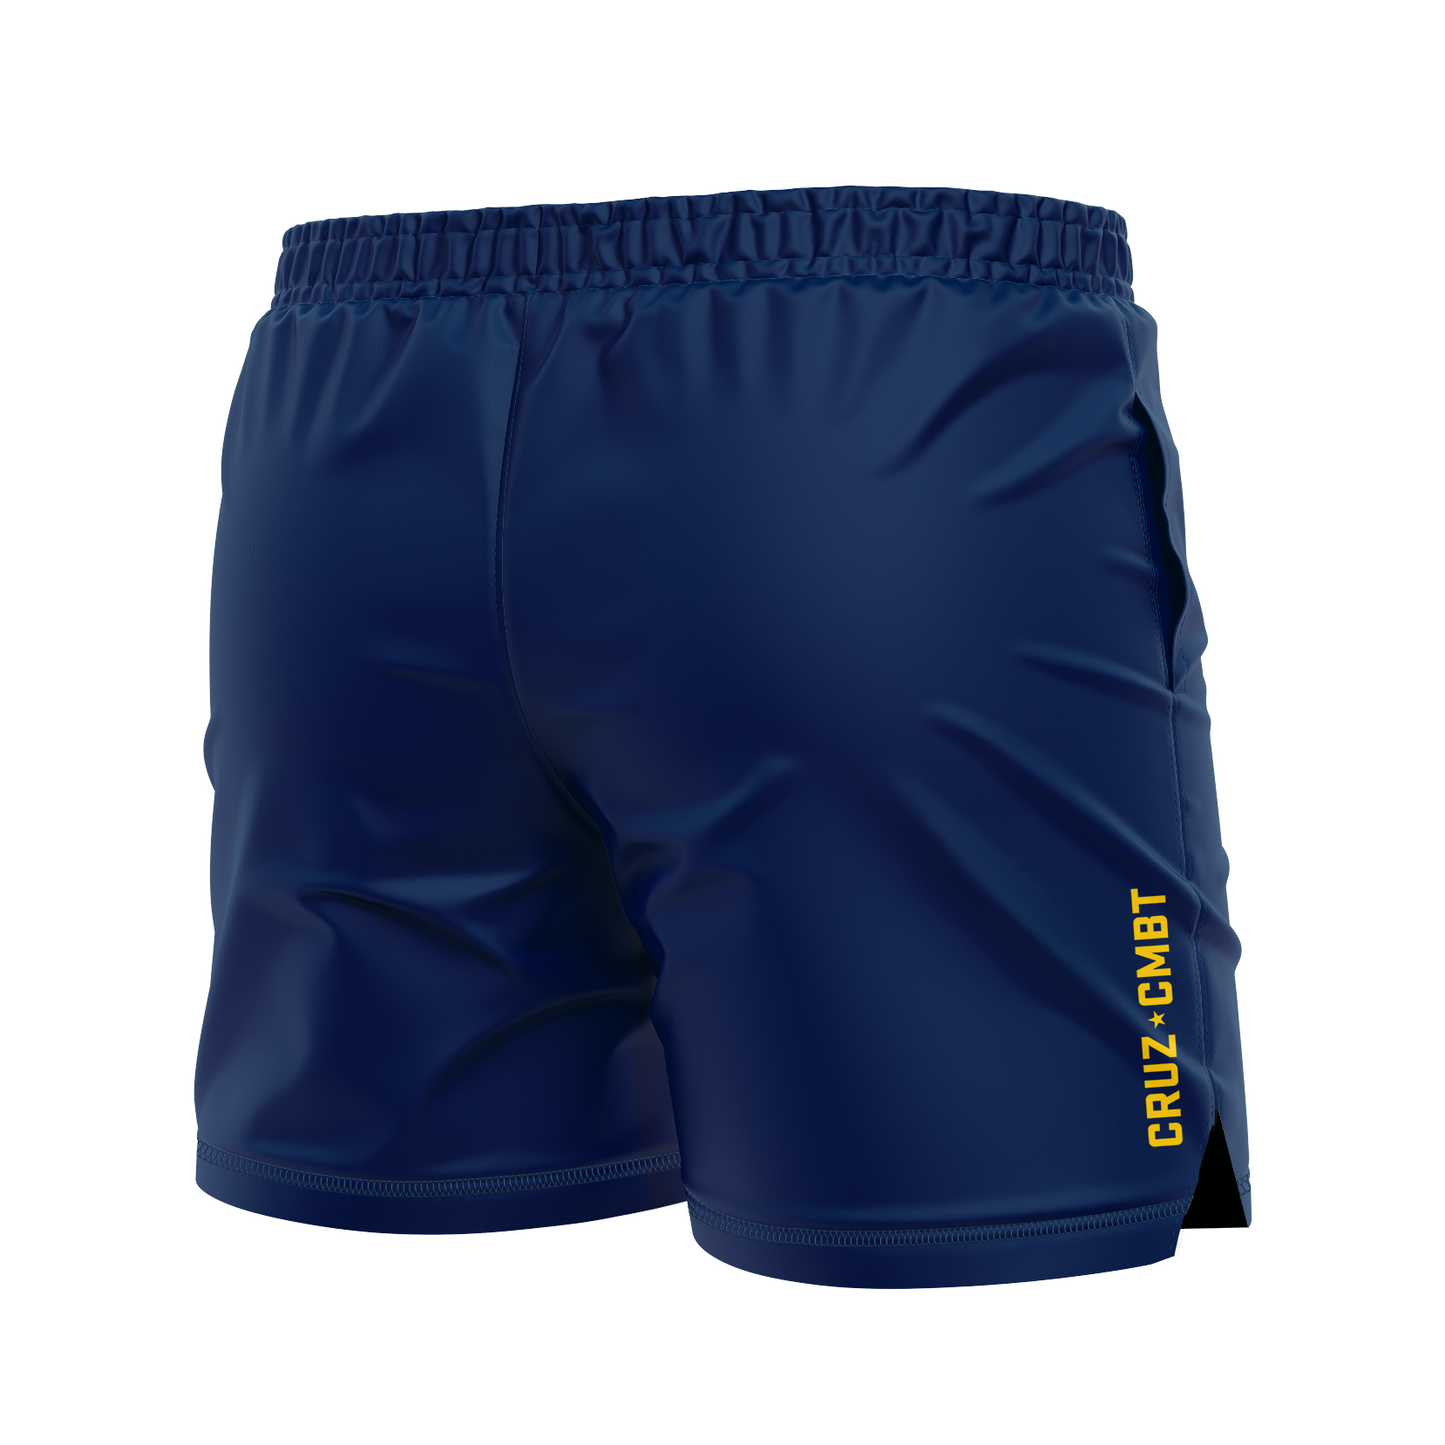 Base Collection men's FC shorts, navy and athl. gold